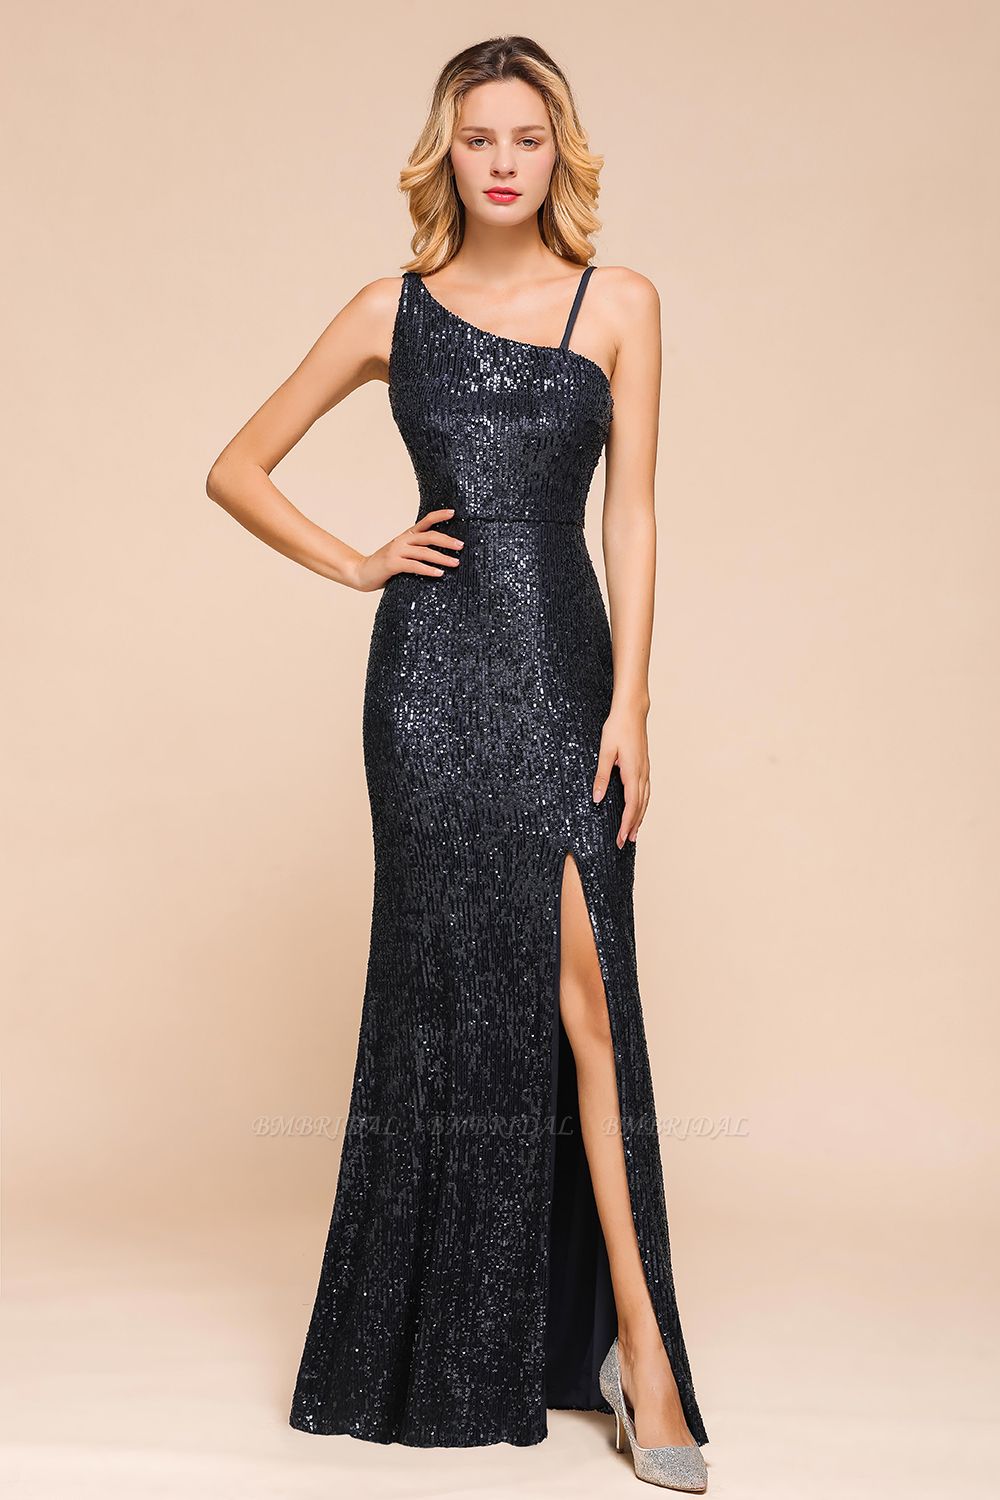 BMbridal Navy One Shoulder Sequins Prom Dress Long Mermaid Evening Gowns With Split